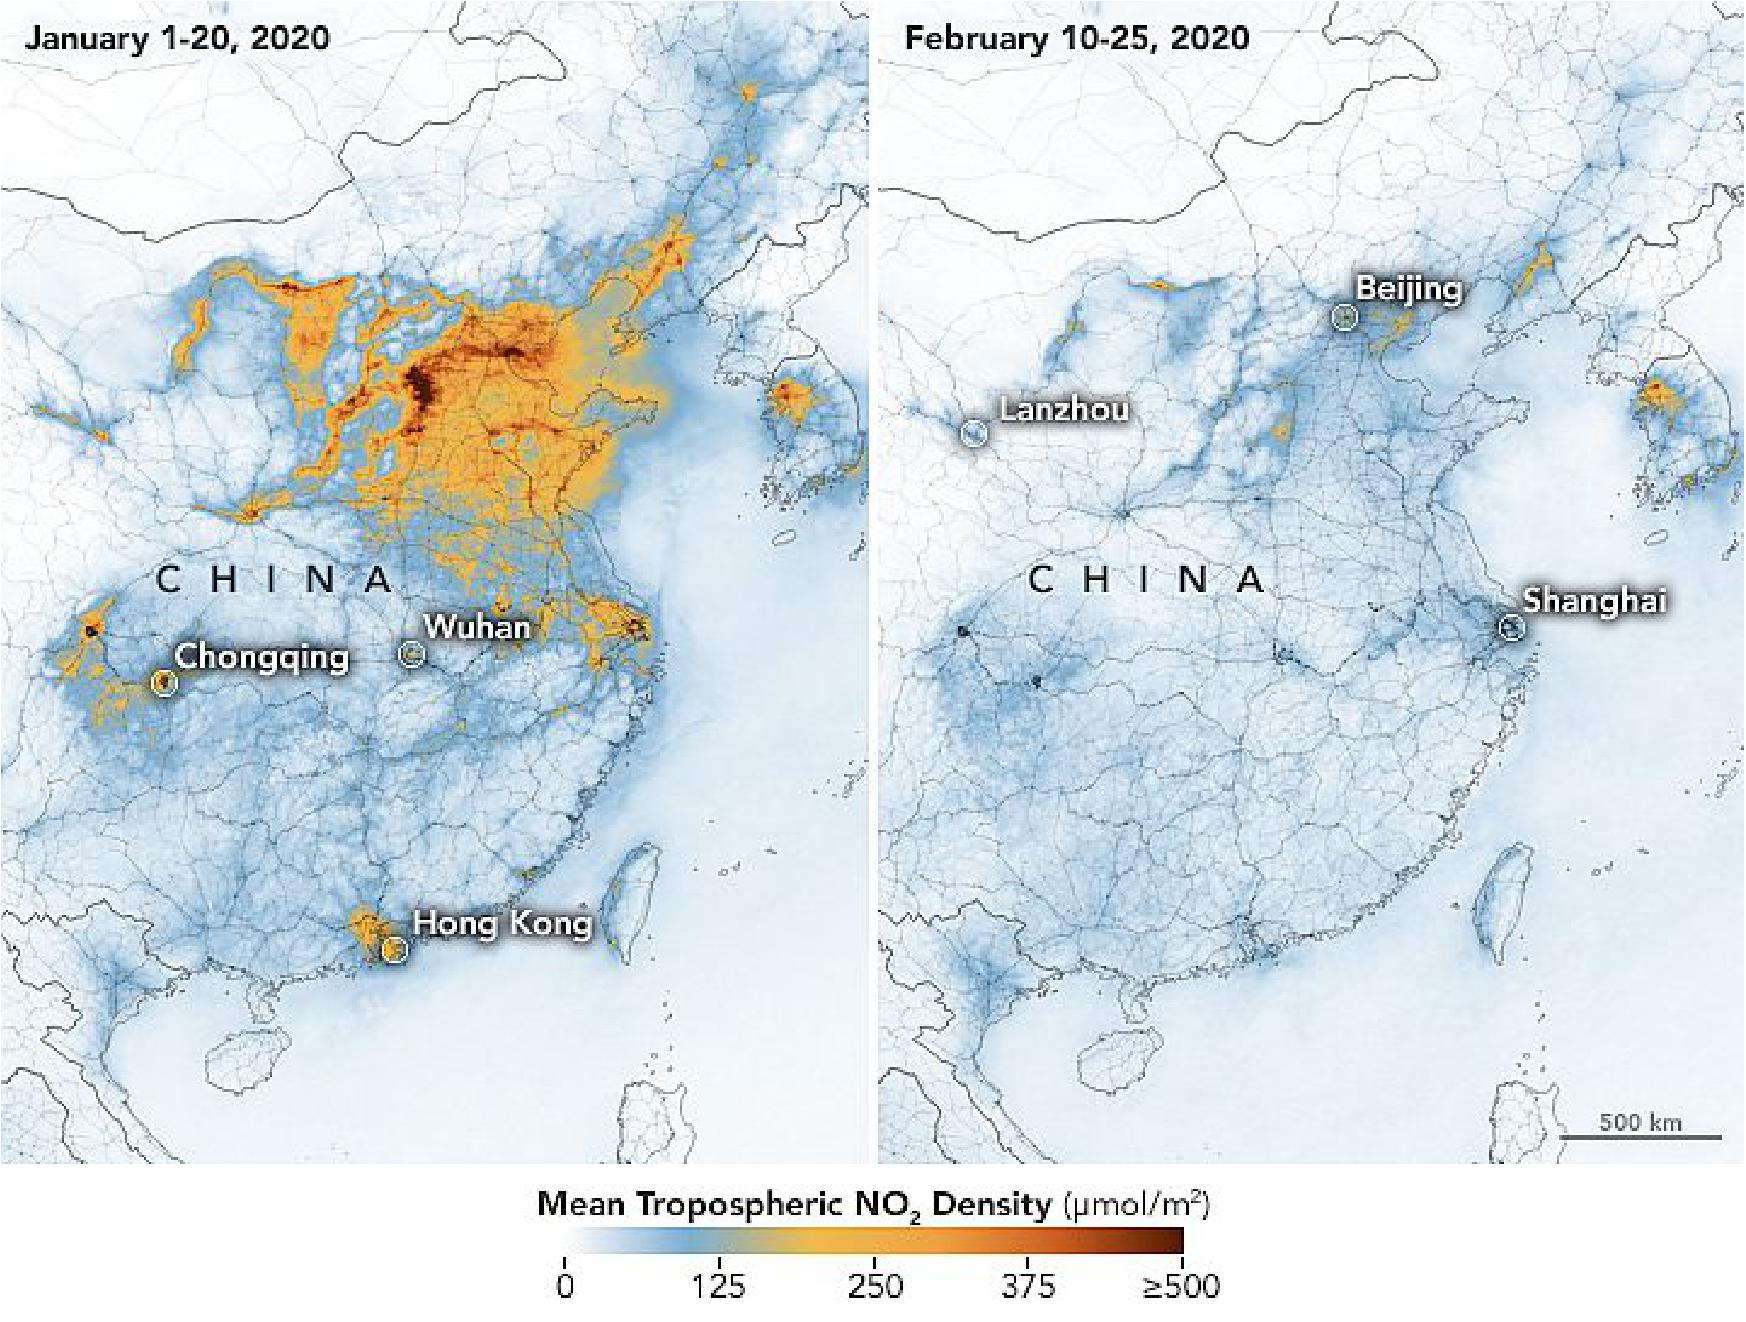 Figure 83: NO2 amounts have dropped with the coronavirus quarantine, Chinese New Year, and a related economic slowdown. These maps show concentrations of nitrogen dioxide, a noxious gas emitted by motor vehicles, power plants, and industrial facilities. The maps show NO2 values across China from January 1-20, 2020 (before the quarantine) and February 10-25 (during the quarantine). The data were collected by TROPOMI (Tropospheric Monitoring Instrument) on ESA's Sentinel-5 satellite. A related sensor, the Ozone Monitoring Instrument (OMI) on NASA's Aura satellite, has been making similar measurements (image credit: NASA Earth Observatory, images by Joshua Stevens, using modified Copernicus Sentinel 5P data processed by the European Space Agency. Story by Kasha Patel with assistance from NASA Aura and NASA SPoRT science teams)